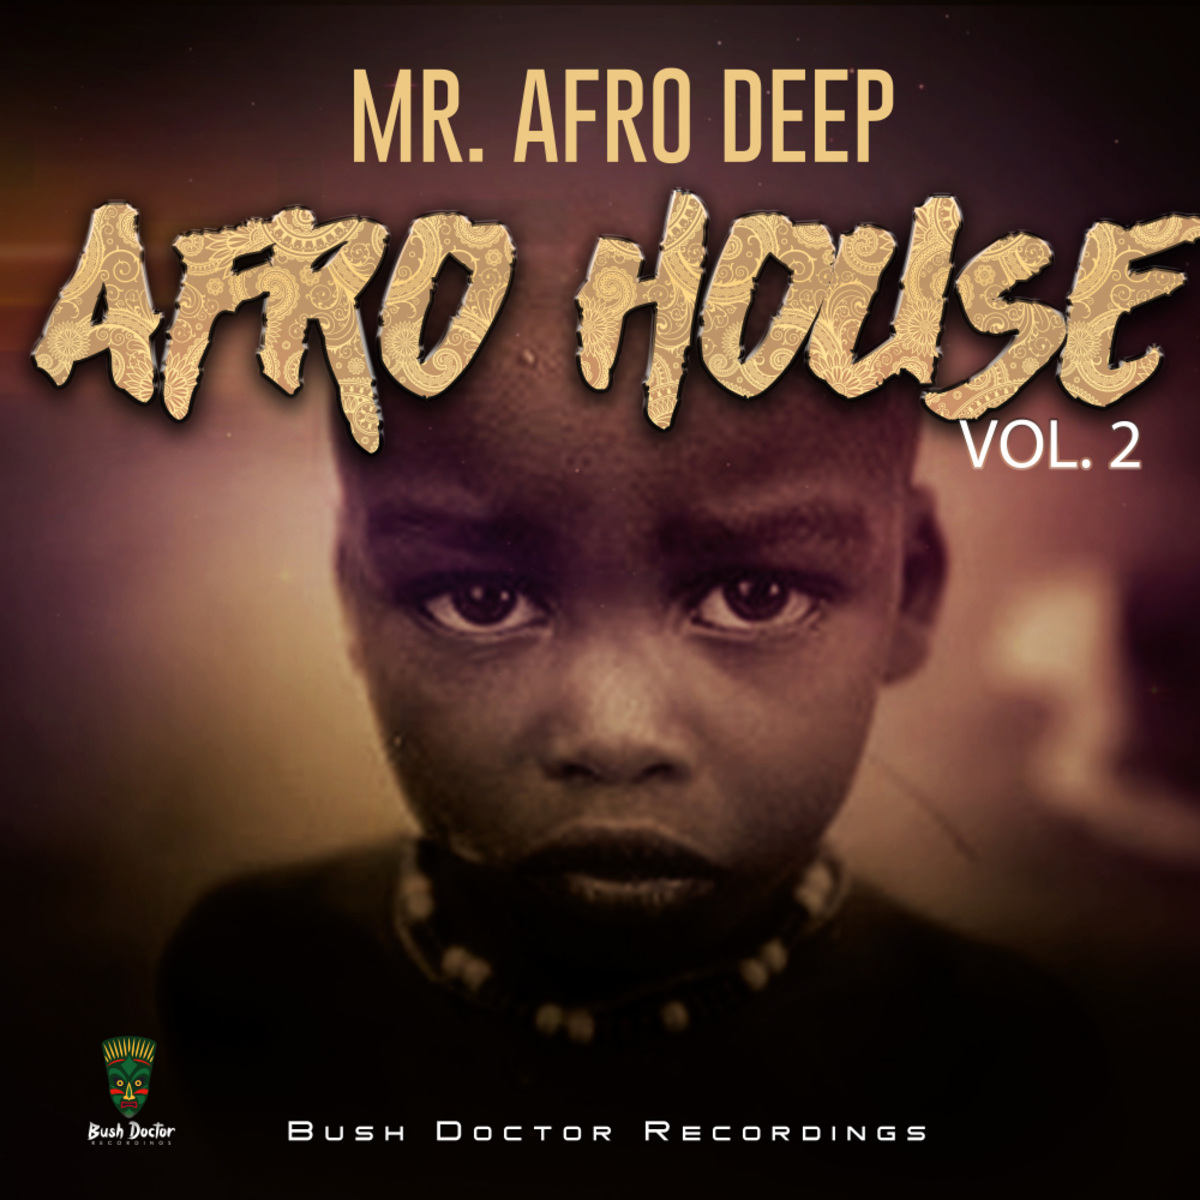 Mr. Afro Deep - Afro House, Vol. 2 / Bush Doctor Recordings